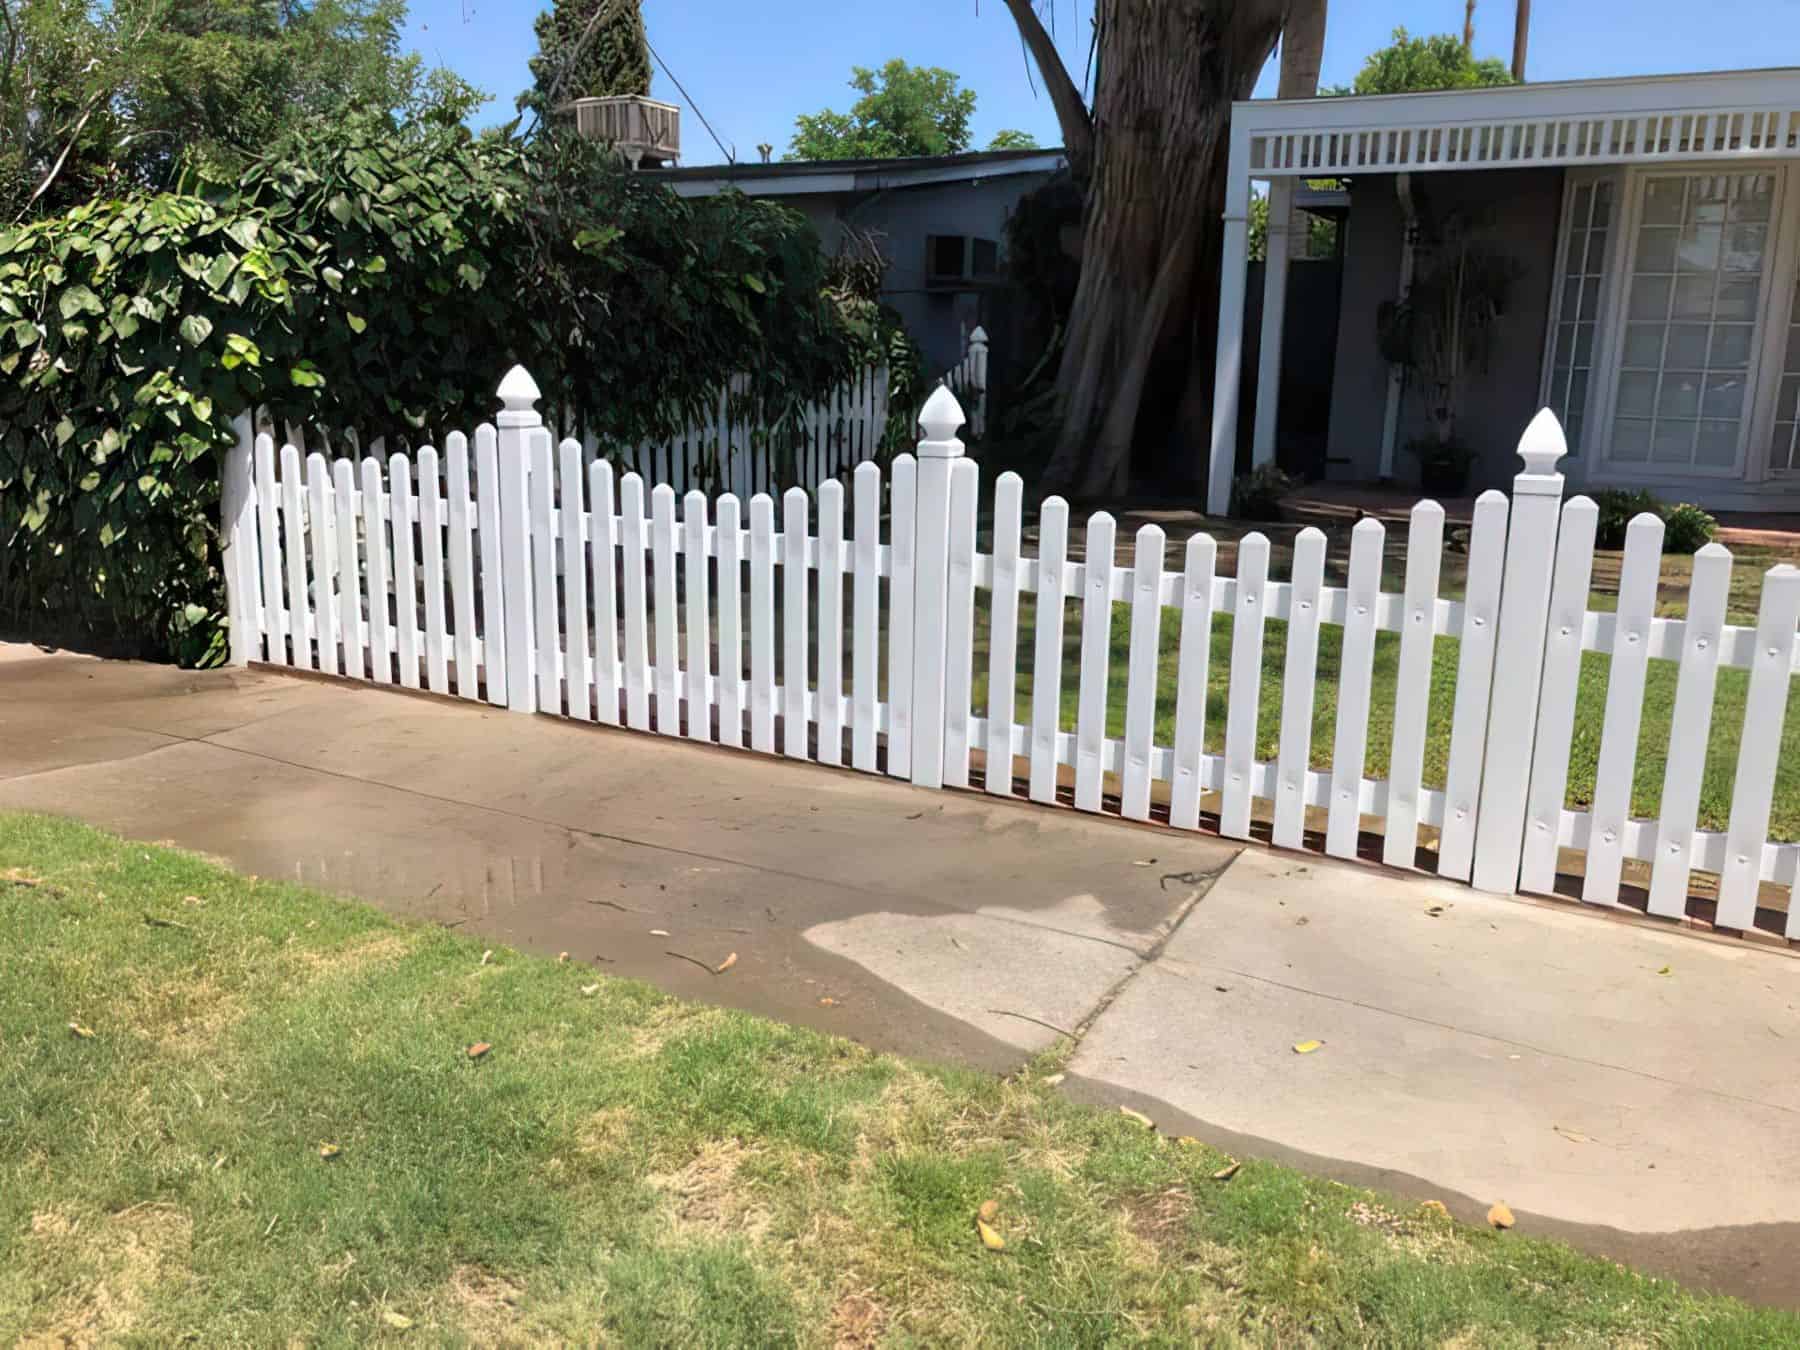 Vinyl scalloped picket fence in front of porch with a glass door entrance and a grassy pathway leading to the entrance.